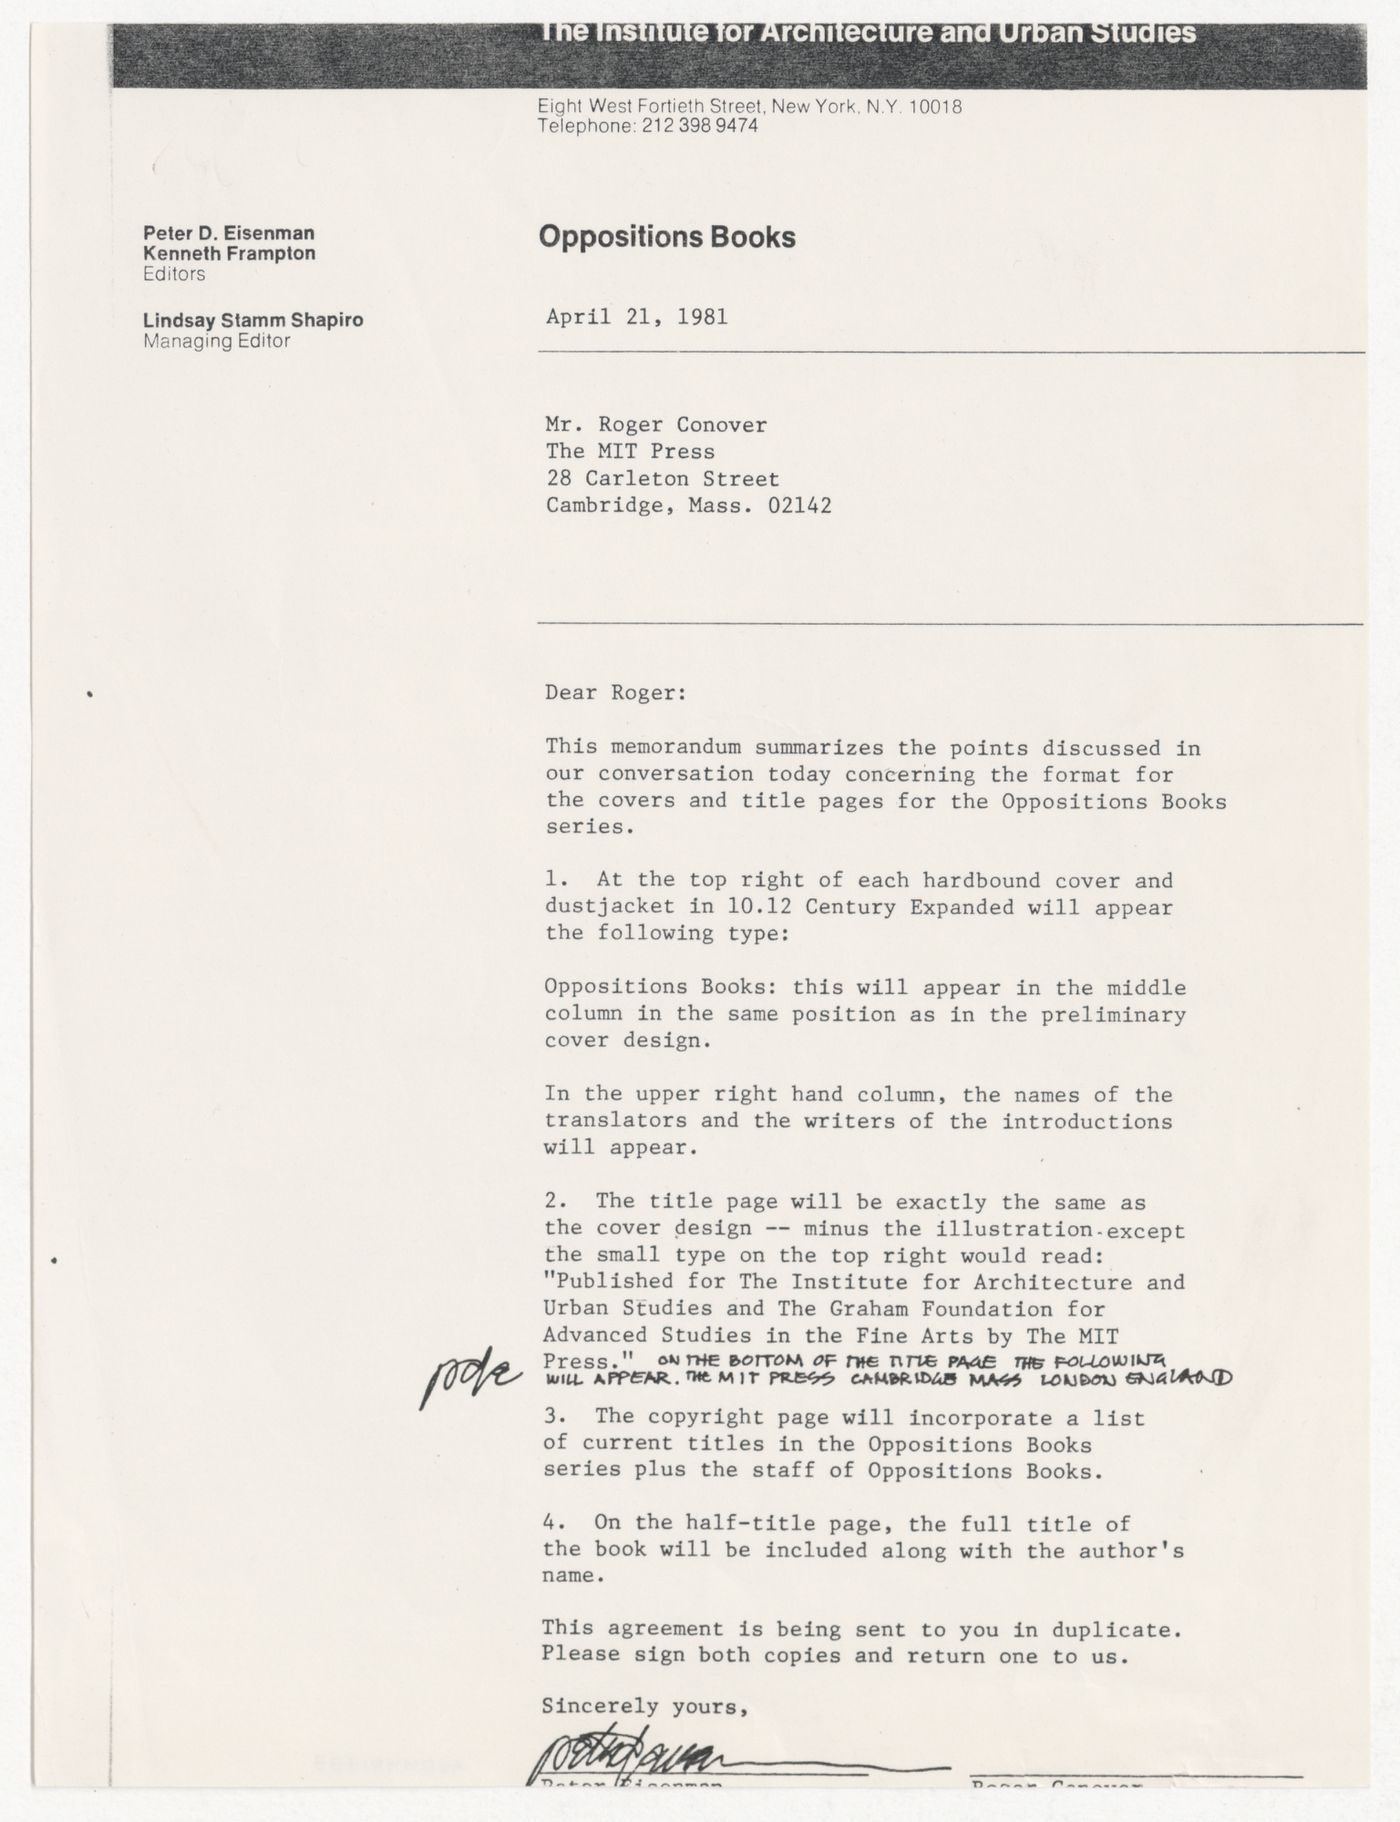 Agreement between Roger Conover and Peter D. Eisenman for format of Oppositions Books covers and title pages with annotations by Peter D. Eisenman